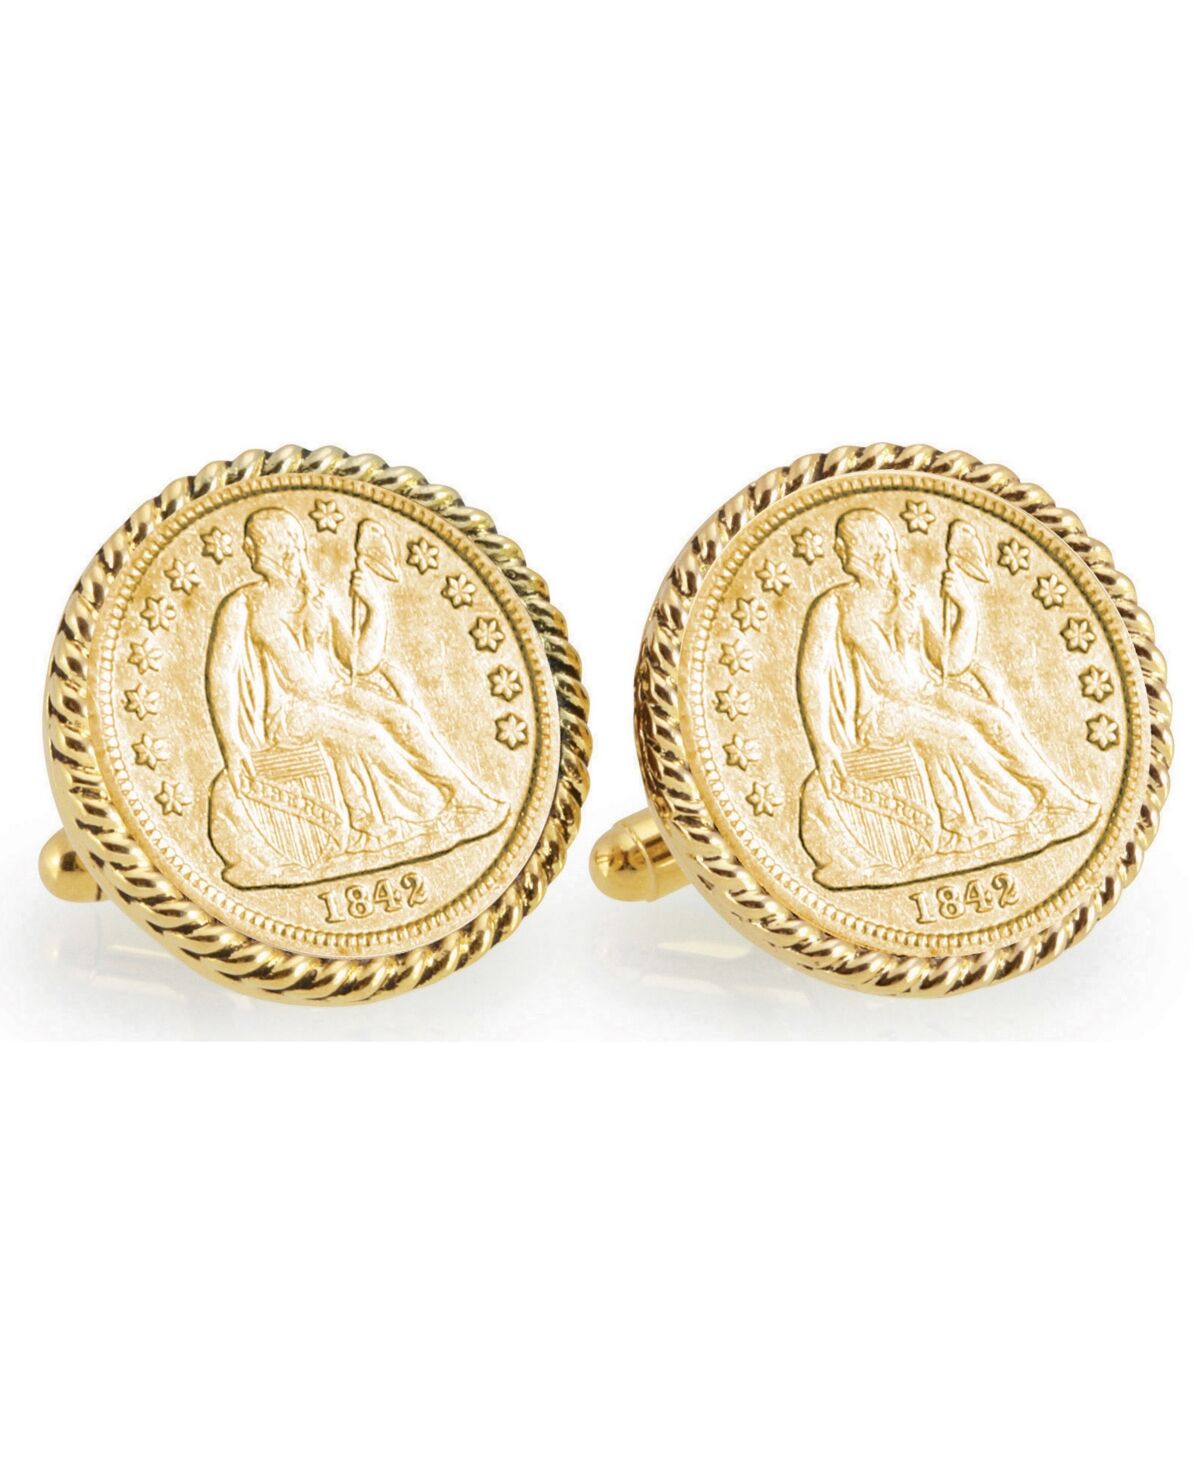 American Coin Treasures Gold-Layered Seated Liberty Silver Dime Rope Bezel Coin Cuff Links - Gold